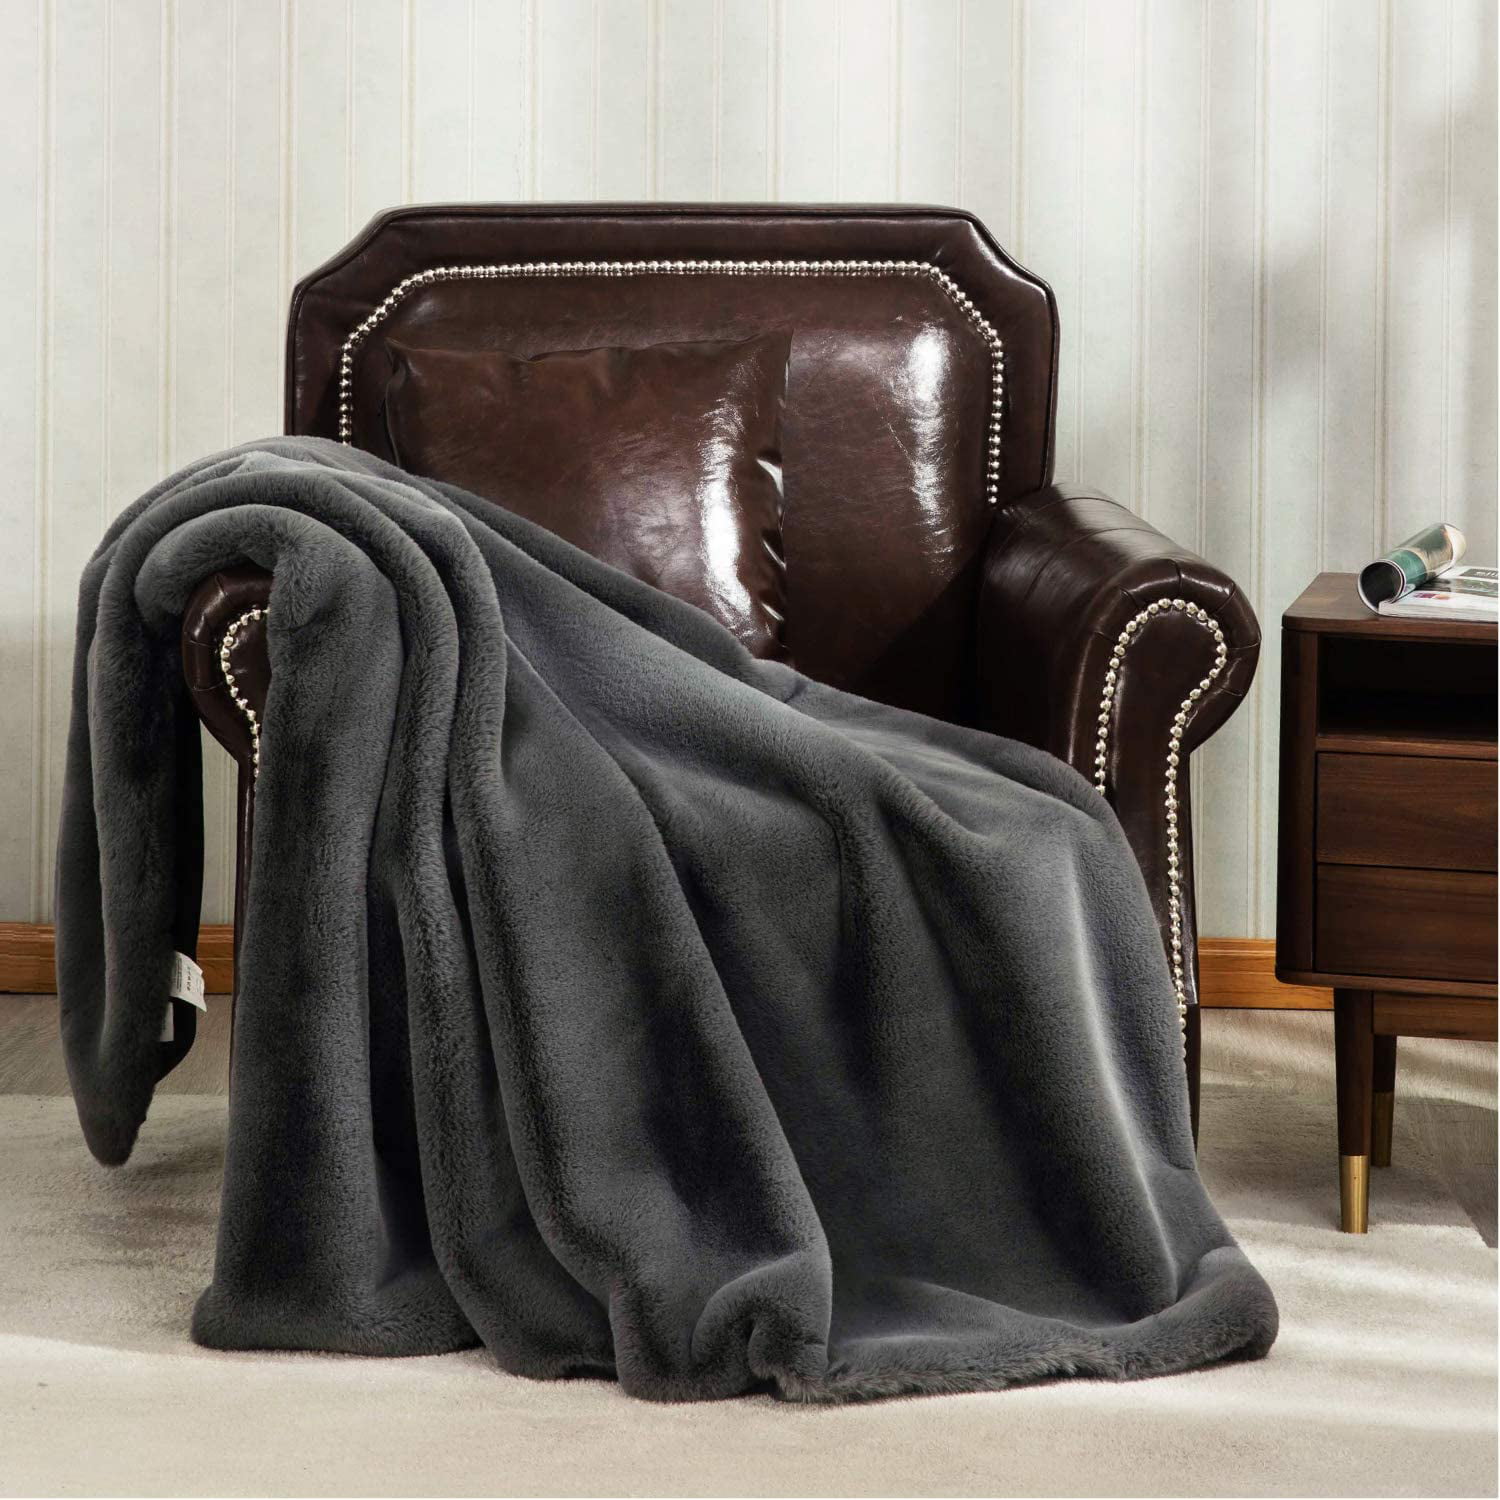 Wellbeing Faux Fur Throw Blanket for Couch Fall Throw Blankets,Soft Reversible Brown Fuzzy Blanket for Bed,Sofa,Chair50 x 60